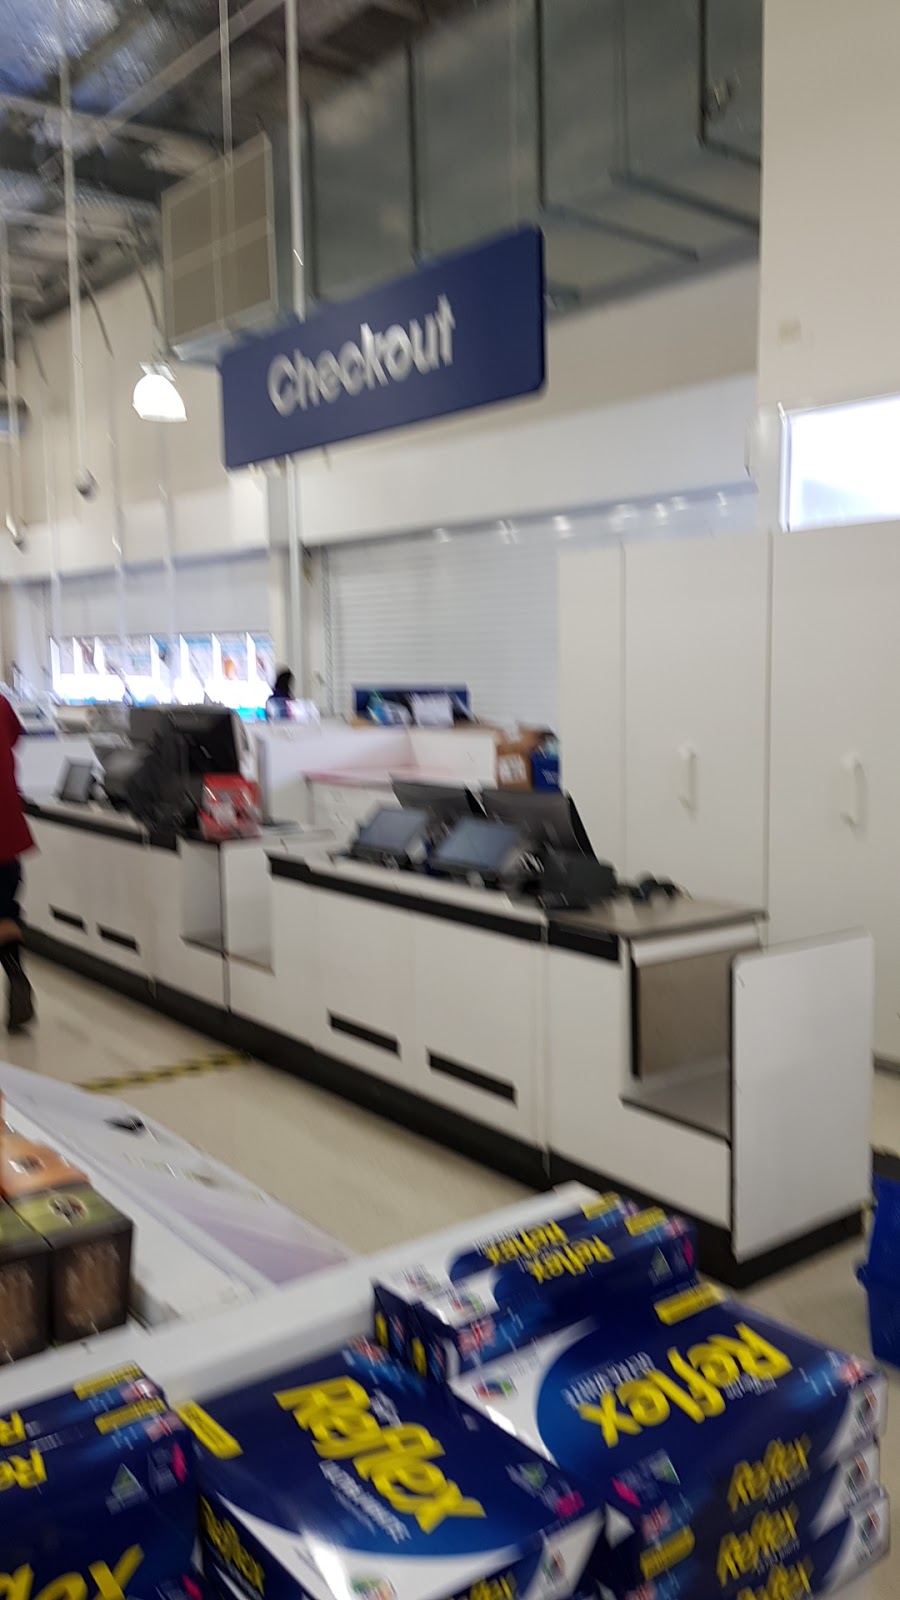 Officeworks Wetherill Park | electronics store | Unit 1, Greenway Supacenta, The Horsley Dr, Wetherill Park NSW 2164, Australia | 0287854100 OR +61 2 8785 4100